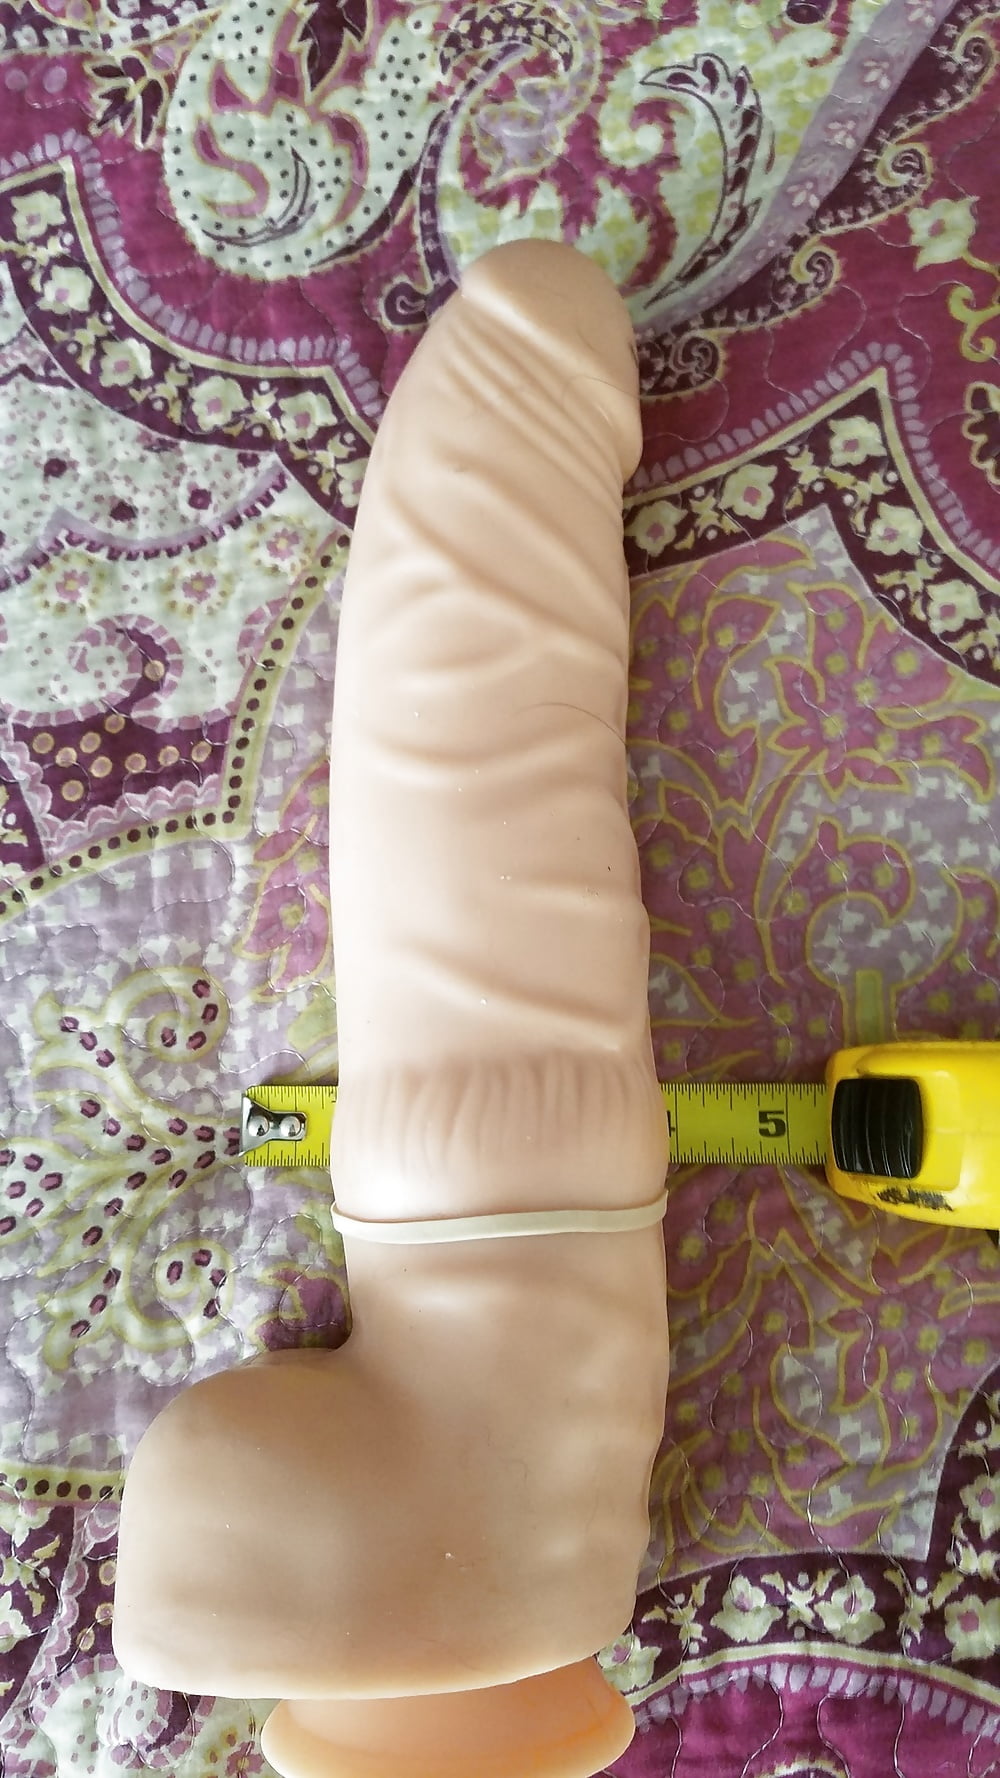 Shy wife spreading wide for big toys (18/49)